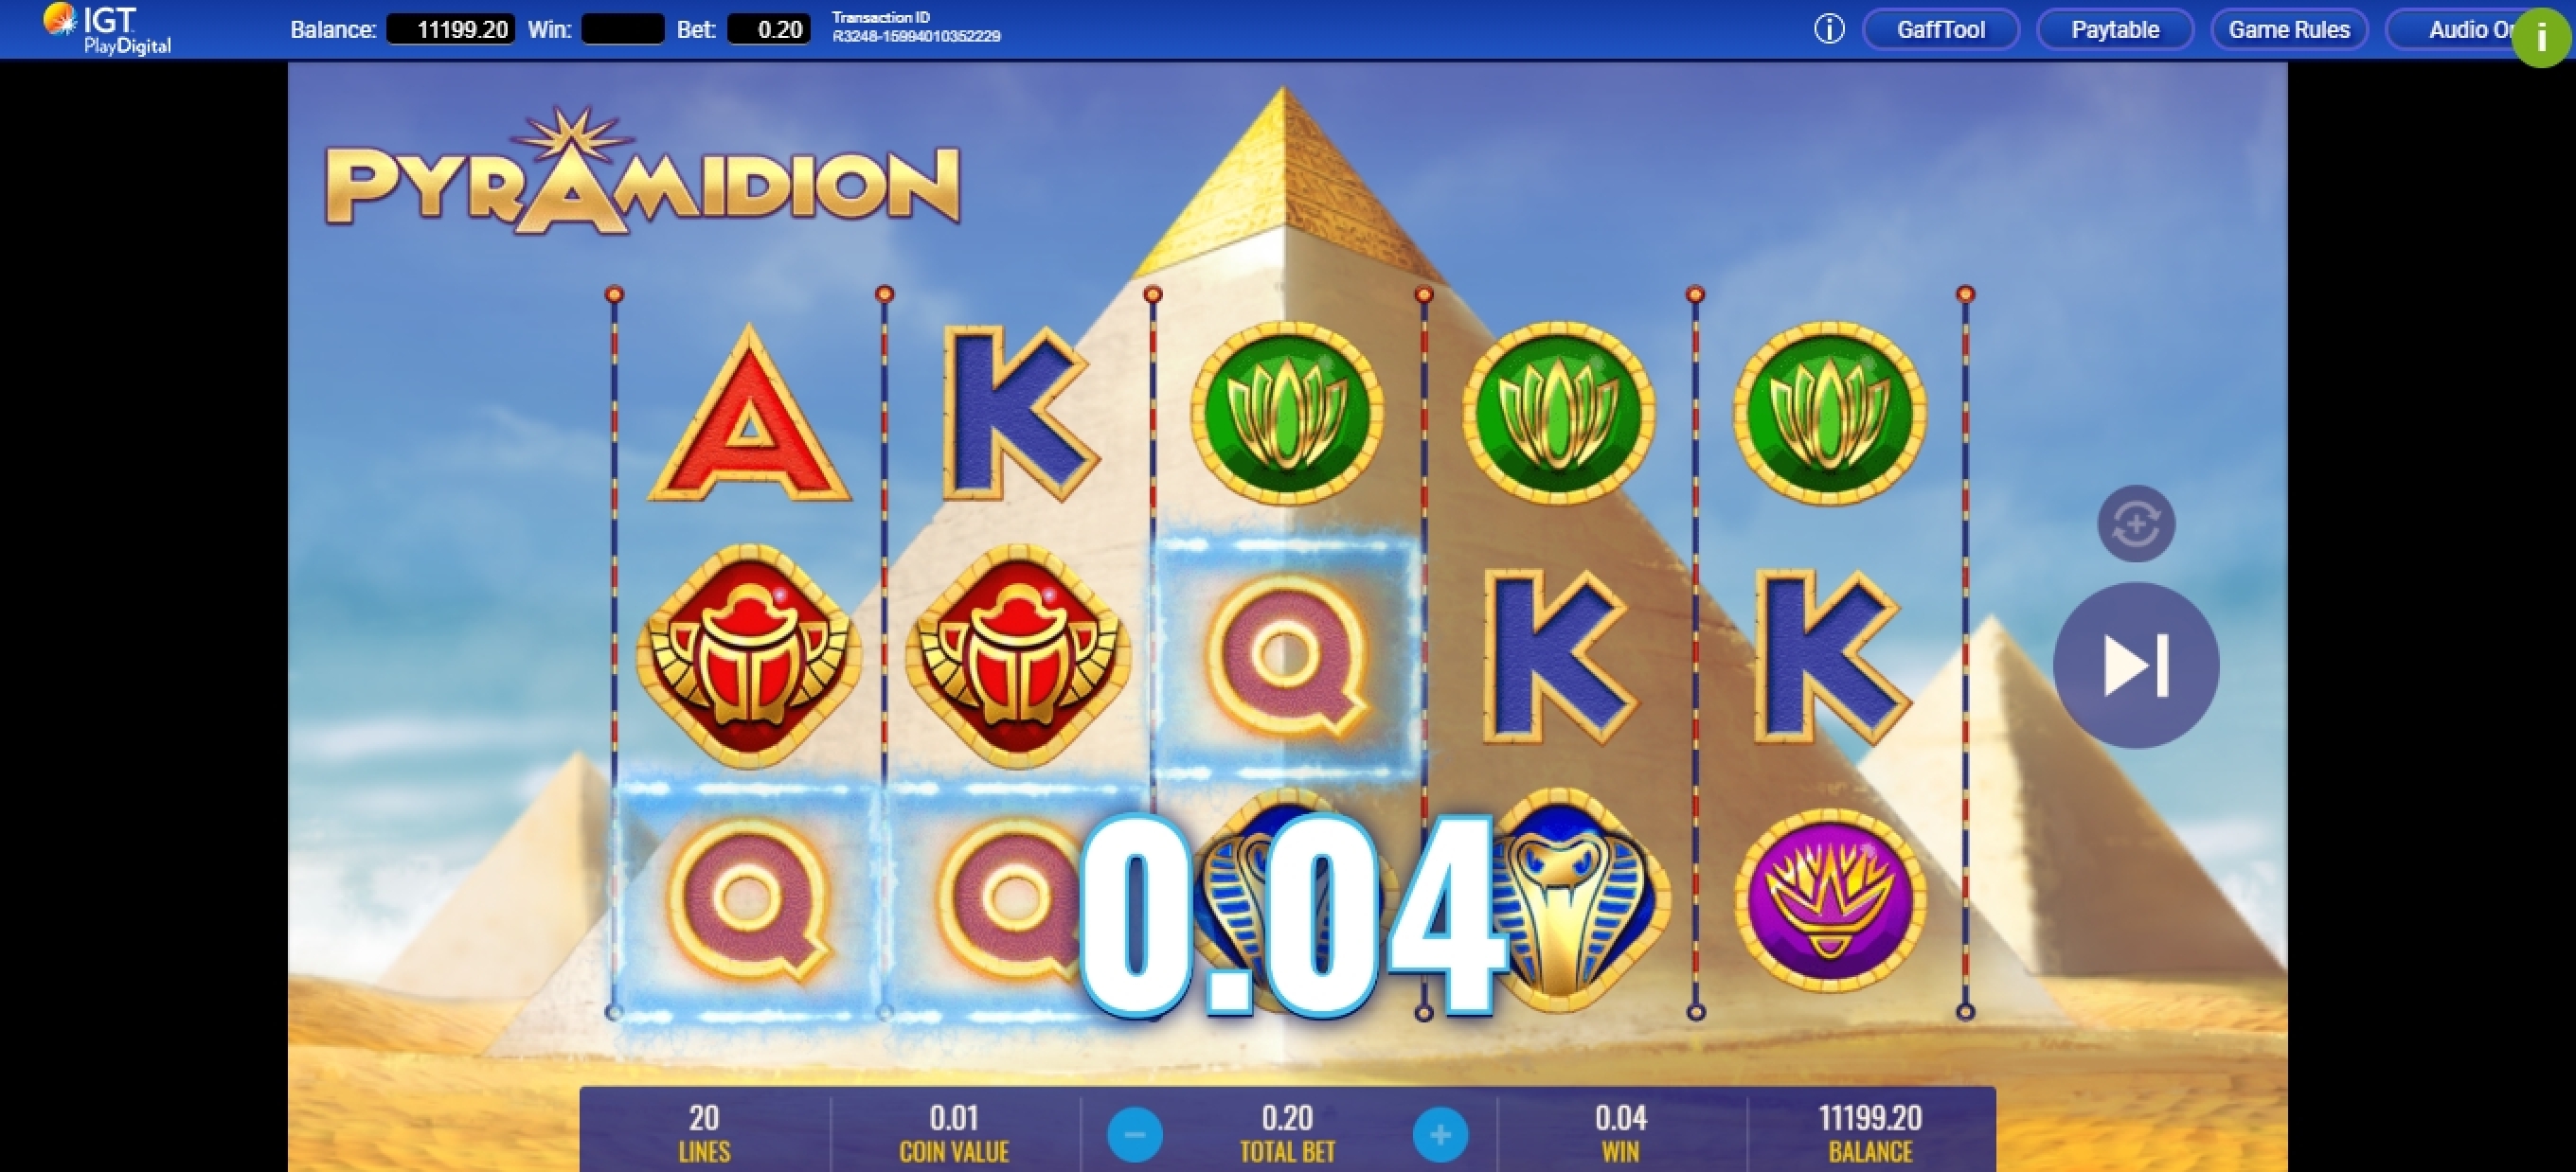 Win Money in Pyramidion Free Slot Game by IGT